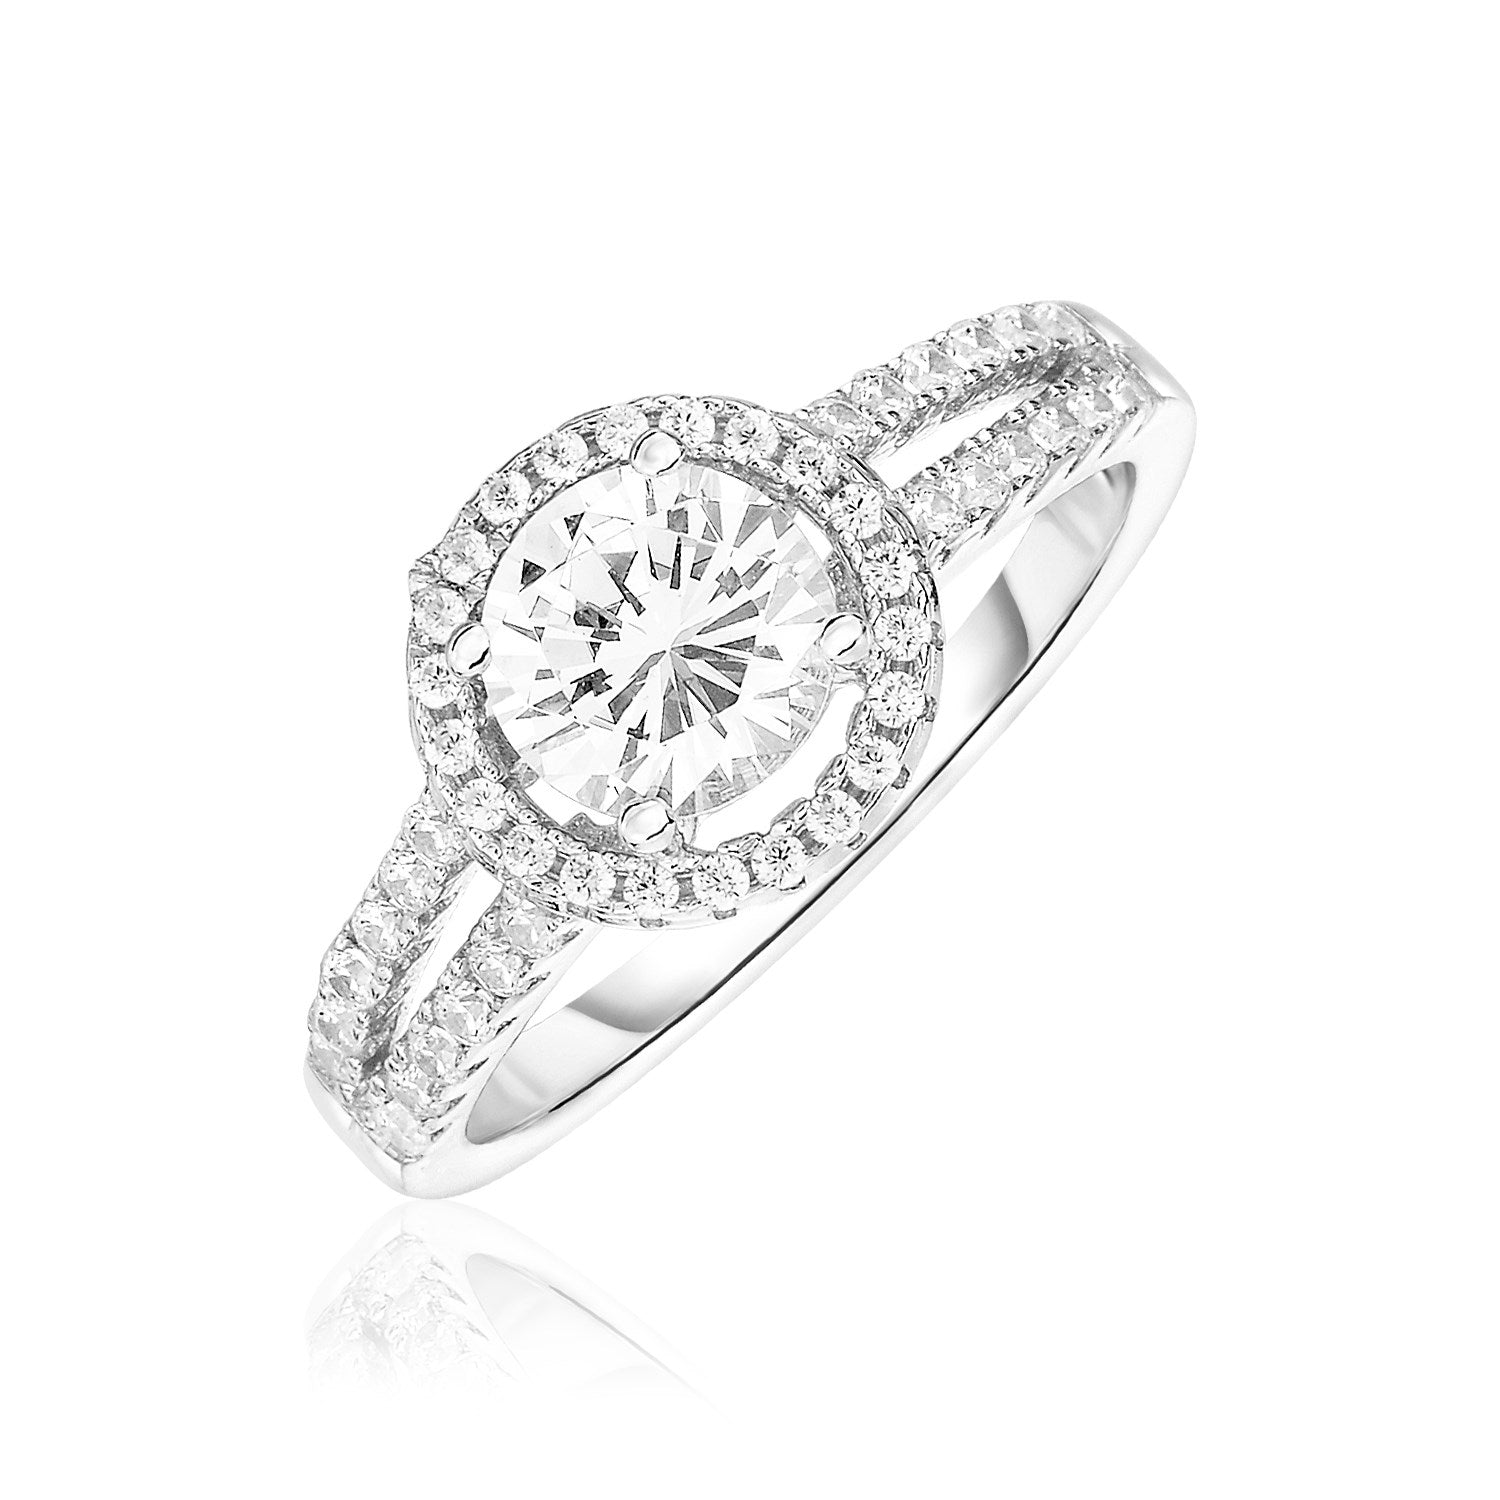 Sterling Silver Round Halo Ring with Cubic Zirconias